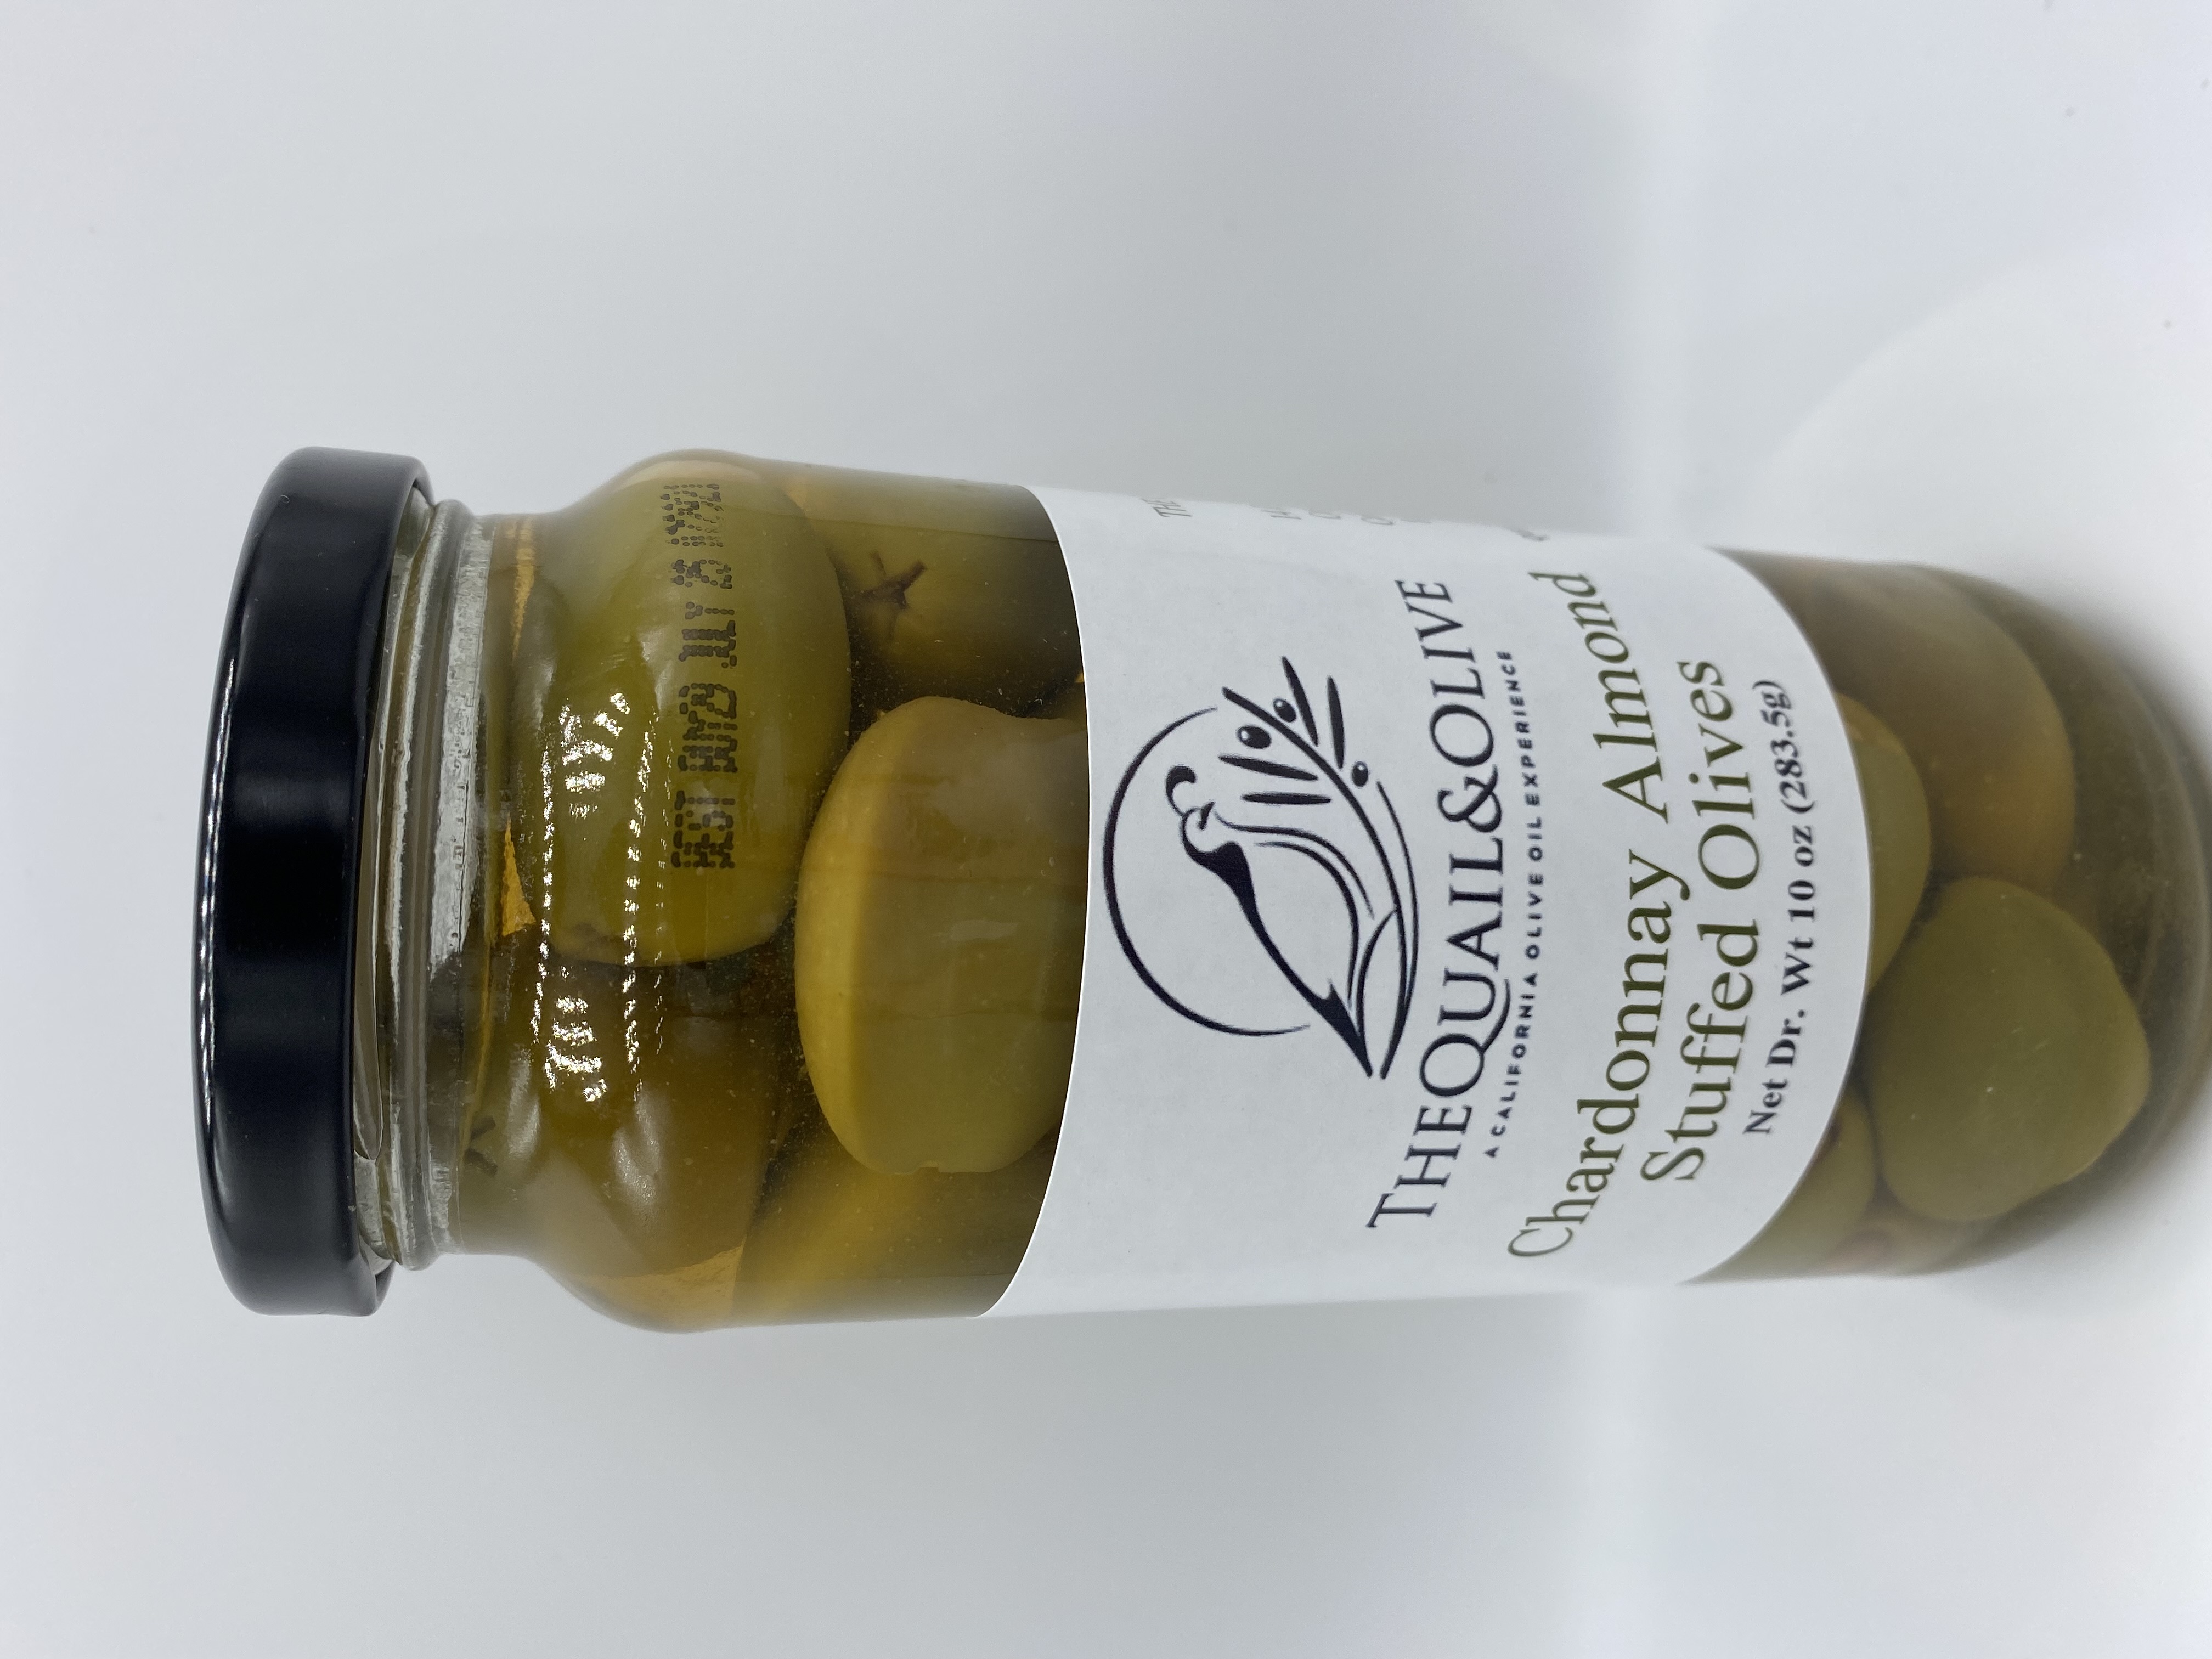 Product Image for Chardonnay Almond Stuffed Olives